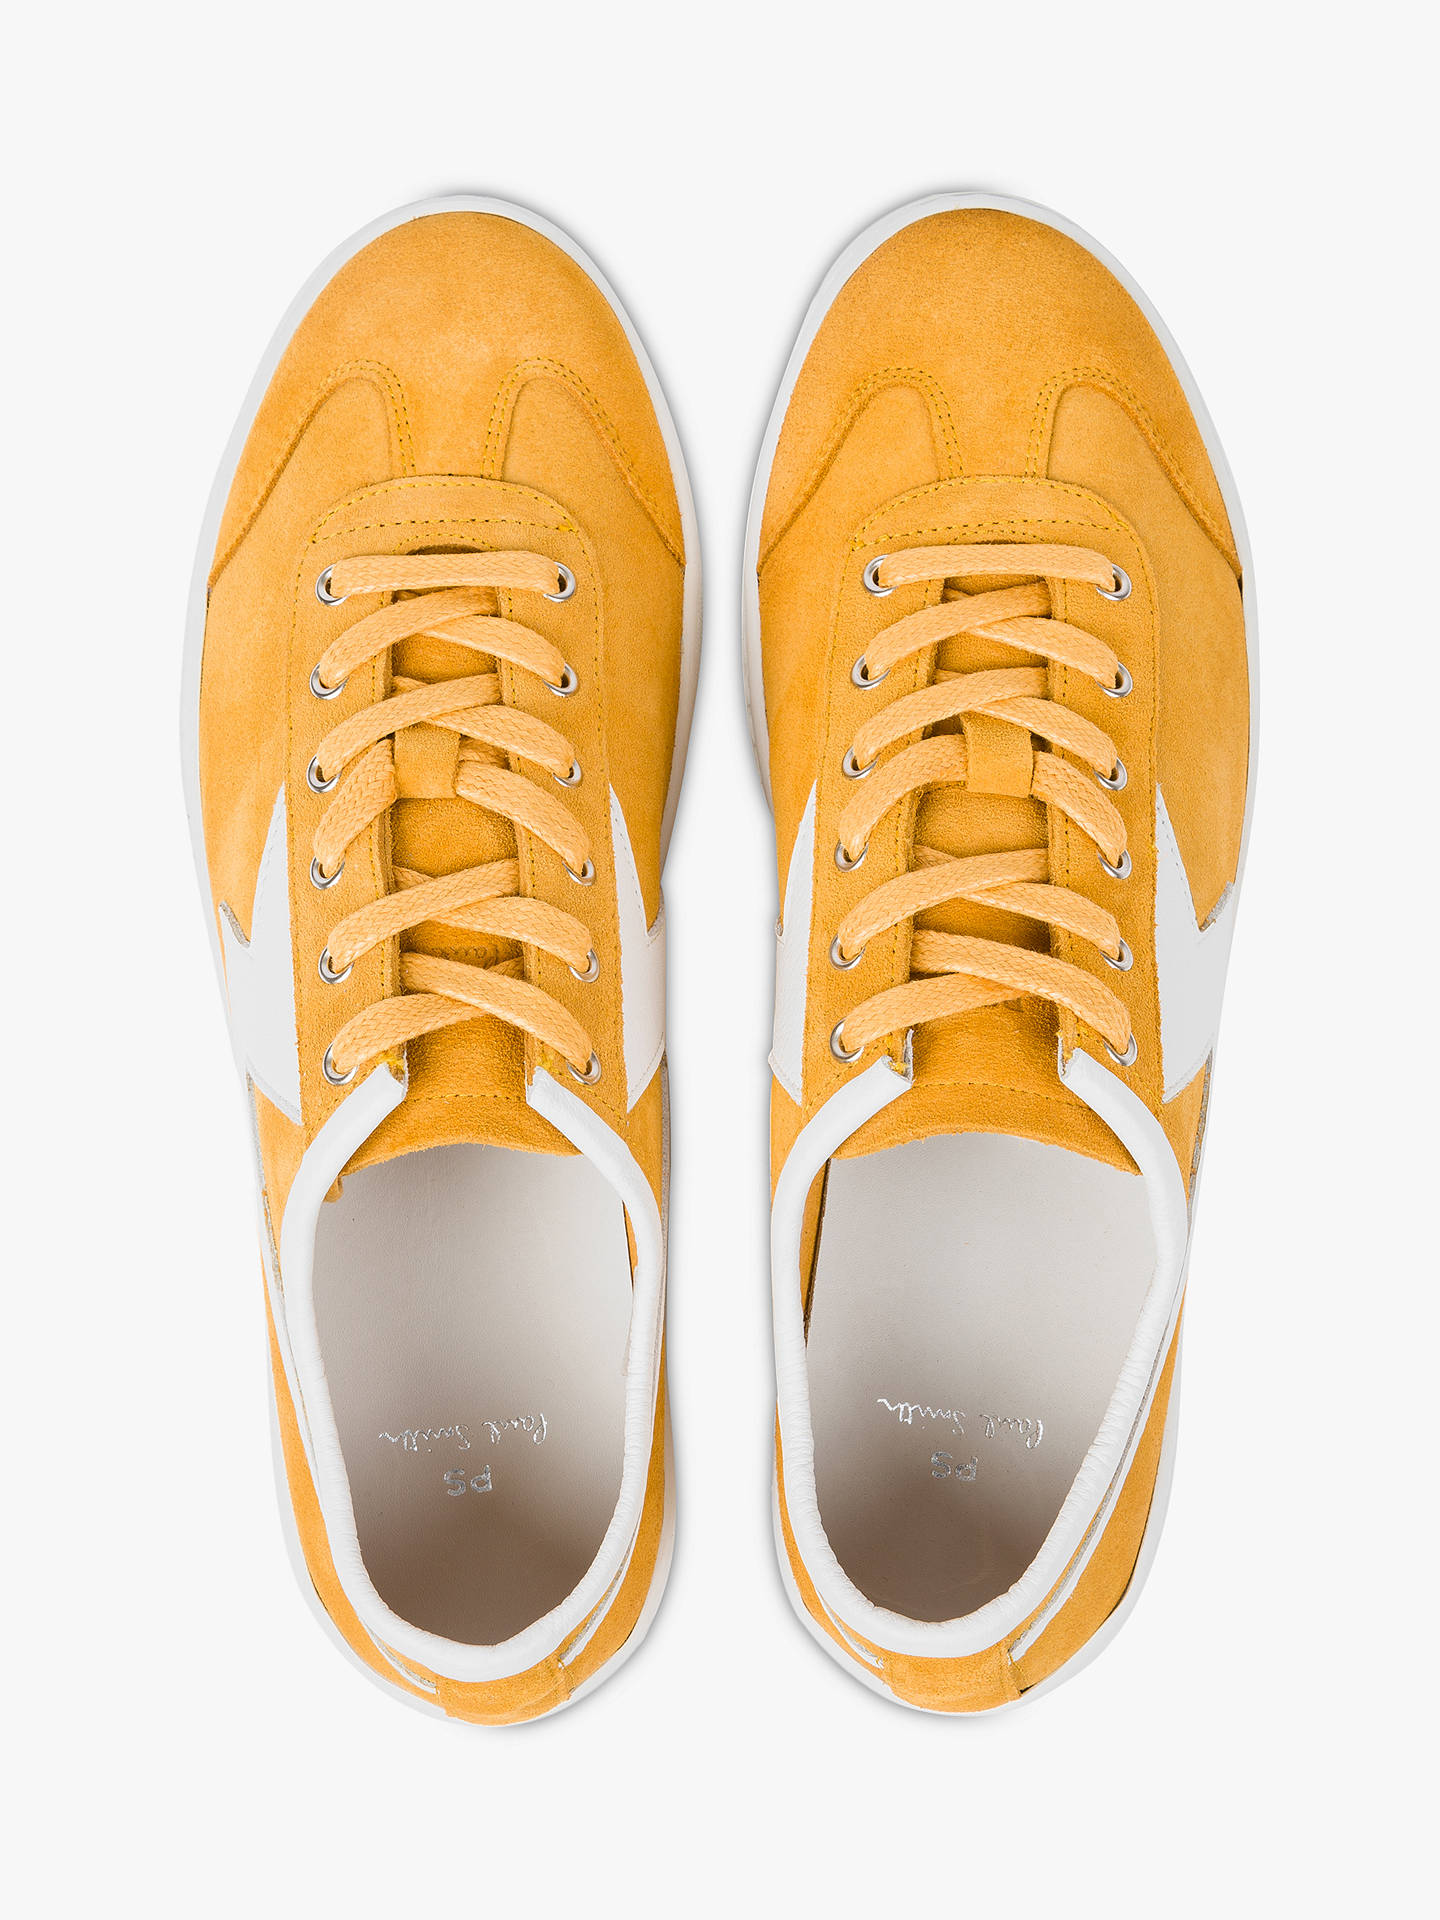 PS Paul Smith Ziggy Suede Trainers, Ochre Yellow at John Lewis & Partners